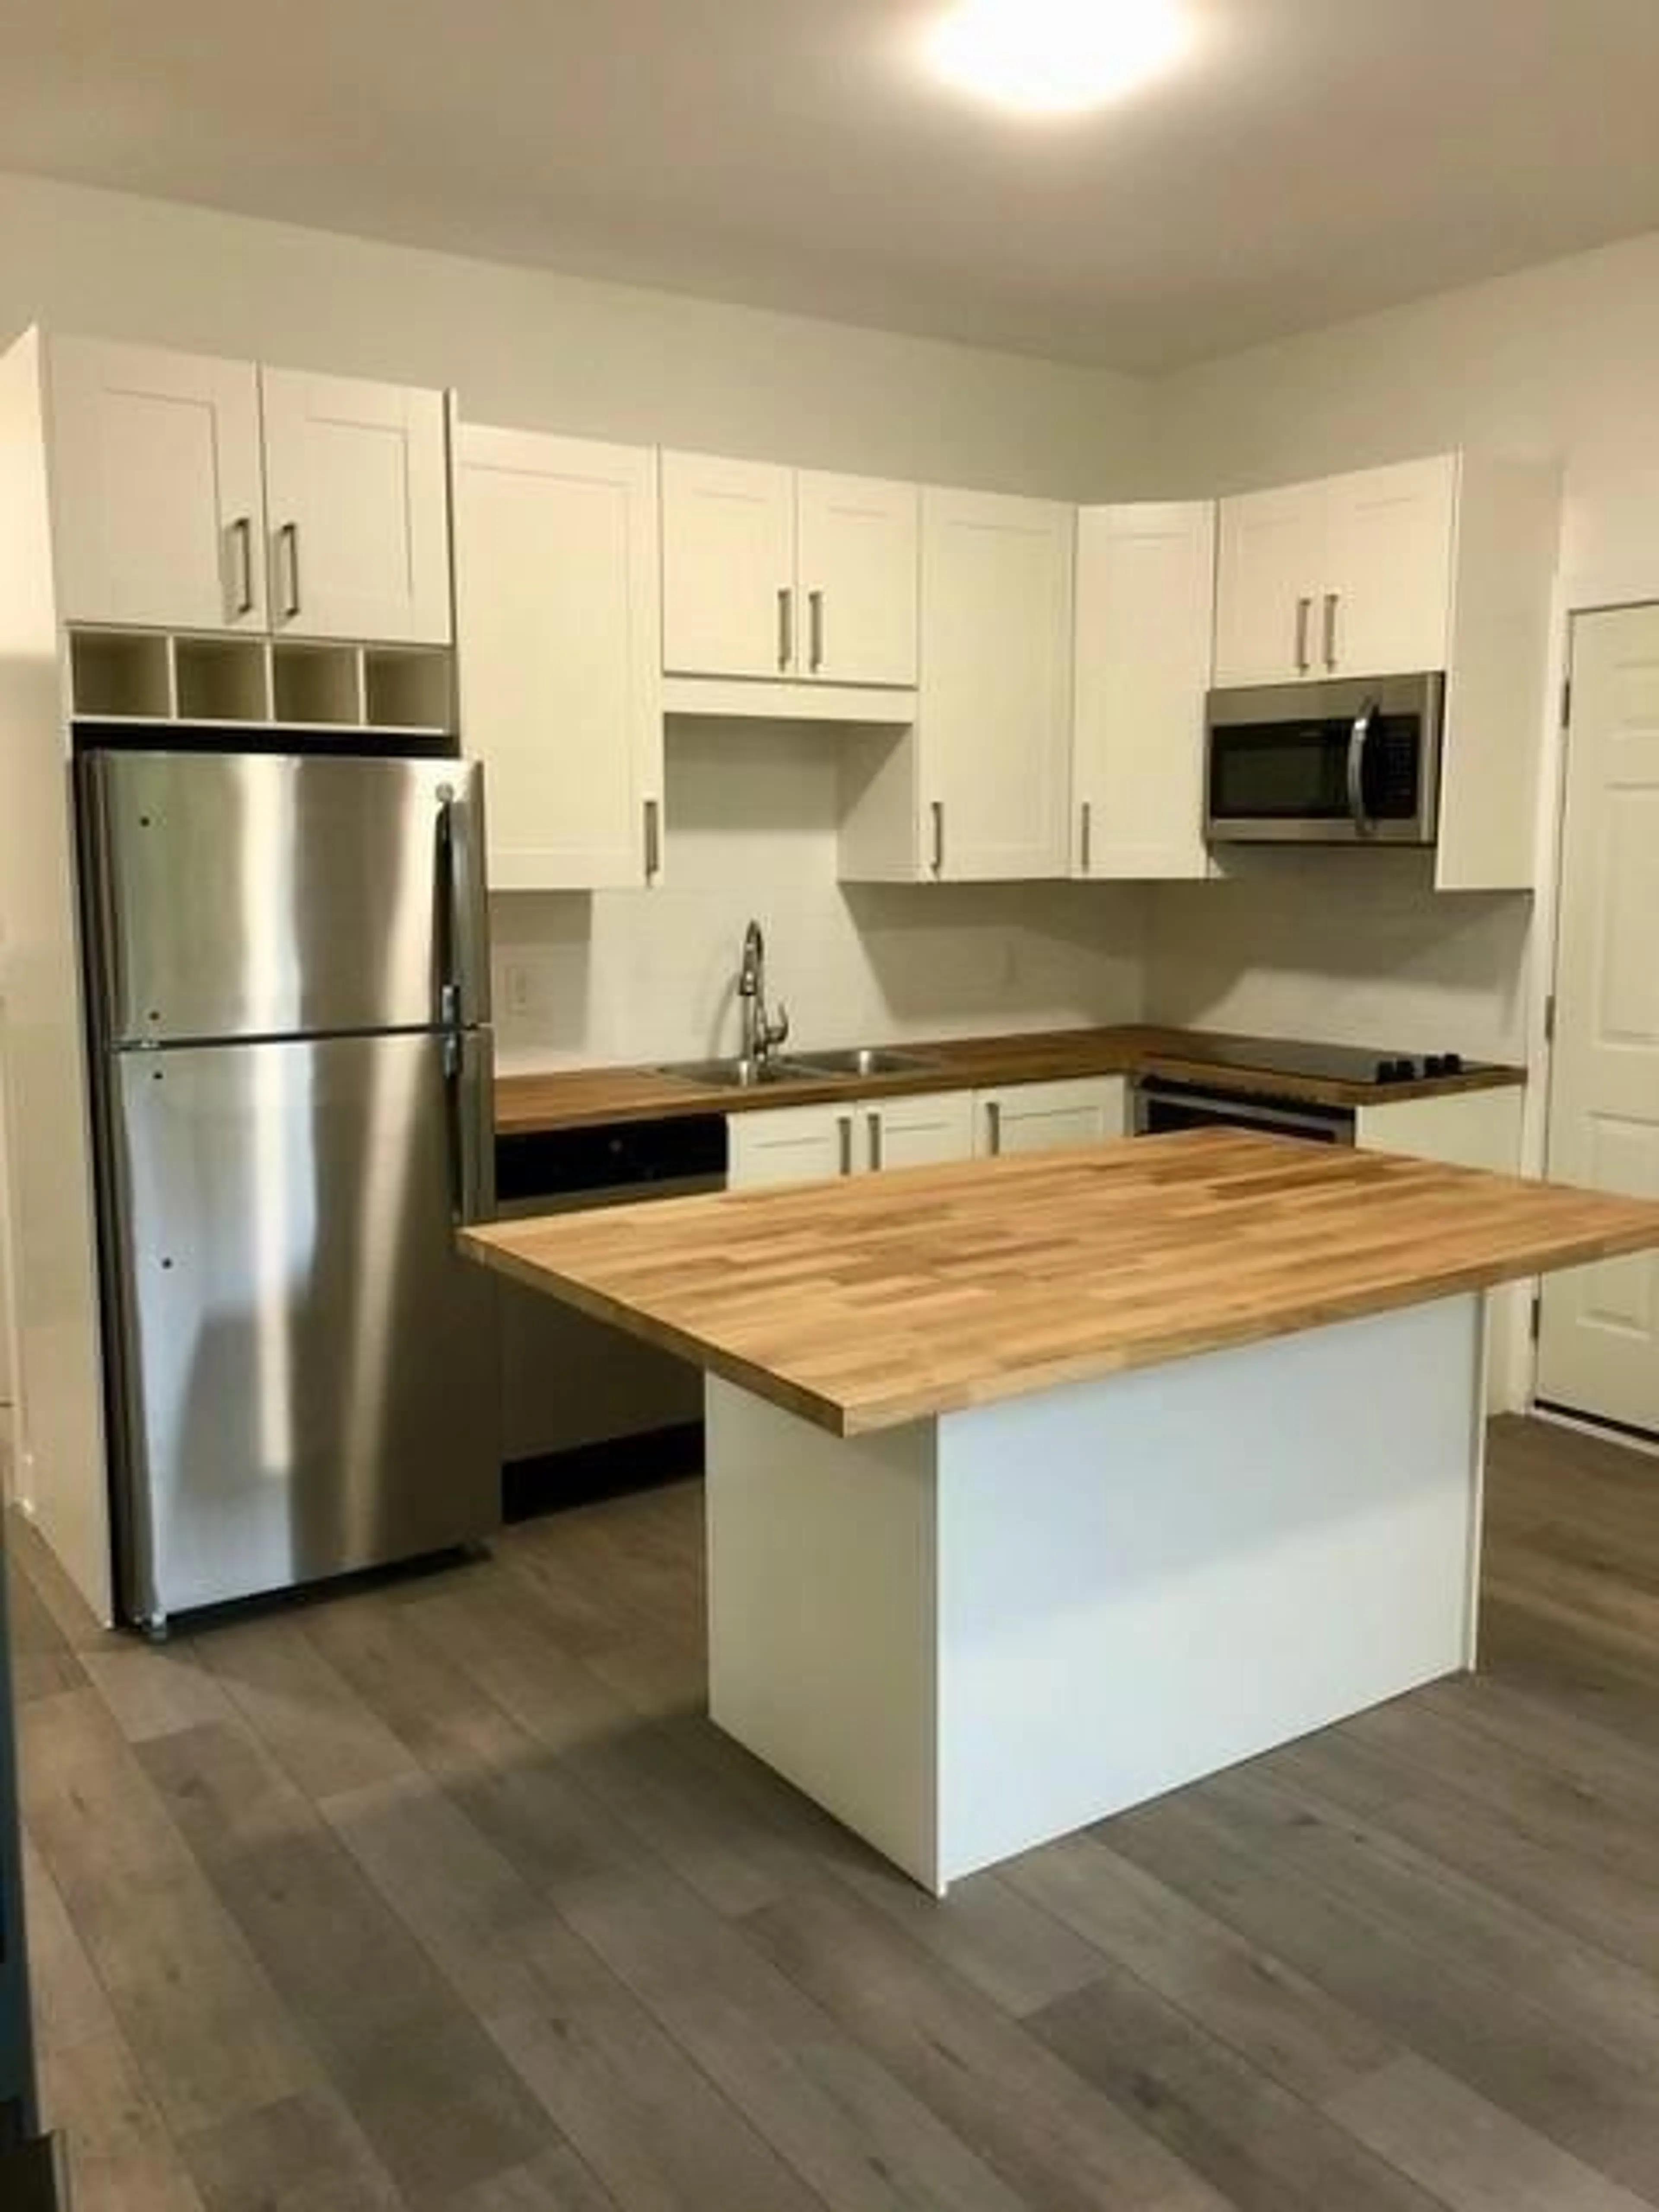 Standard kitchen for 51 WEST Ave, Hamilton Ontario L8N 2S2